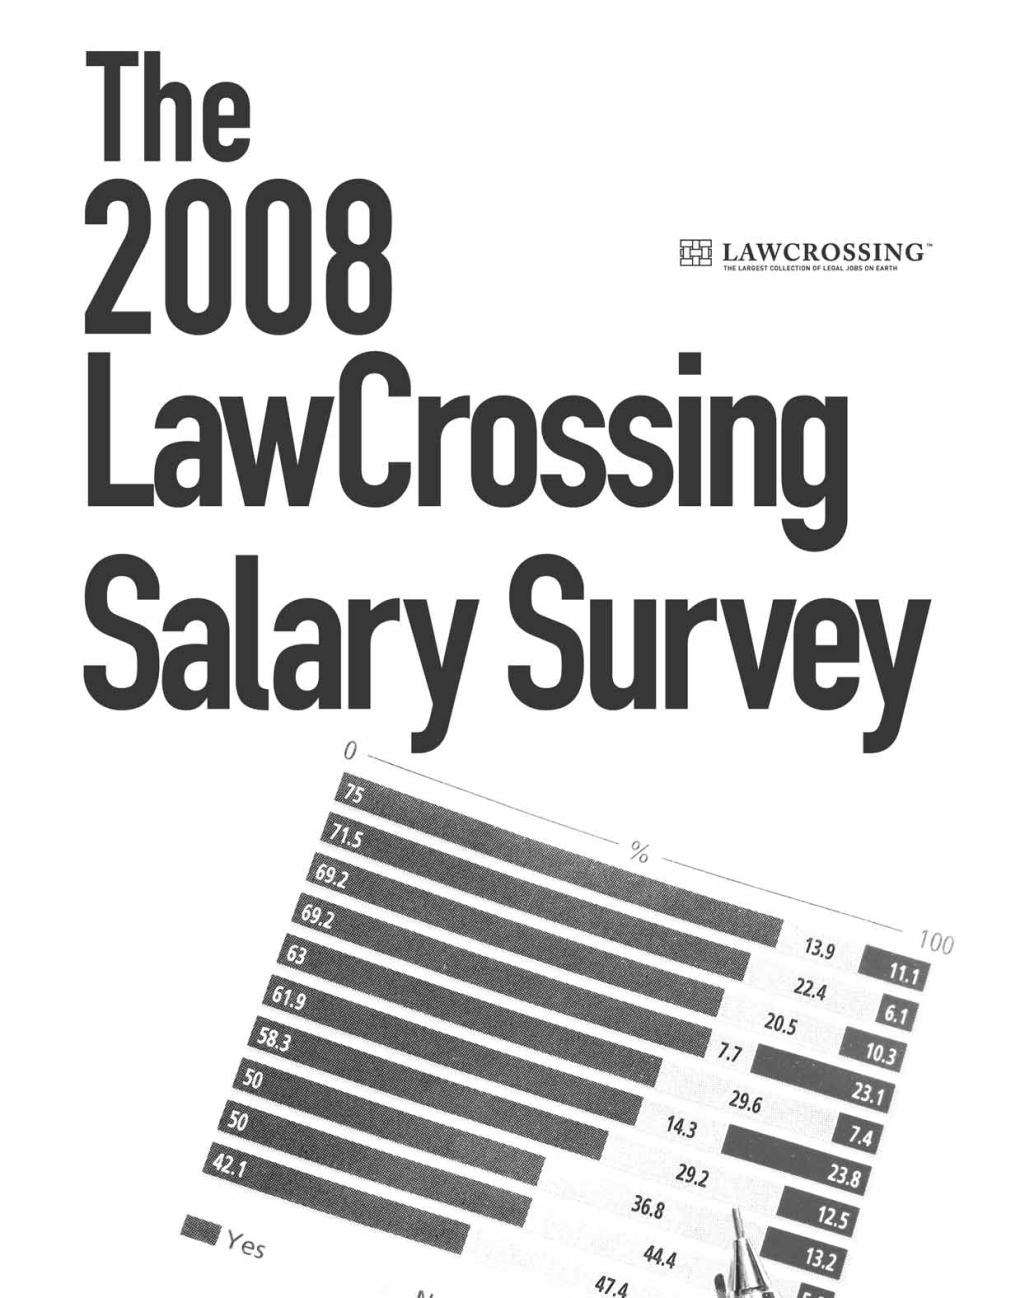 The 2008 Lawcrossing Salary Survey Is to Serve As a Bridge Between Law ﬁrms and Attorneys